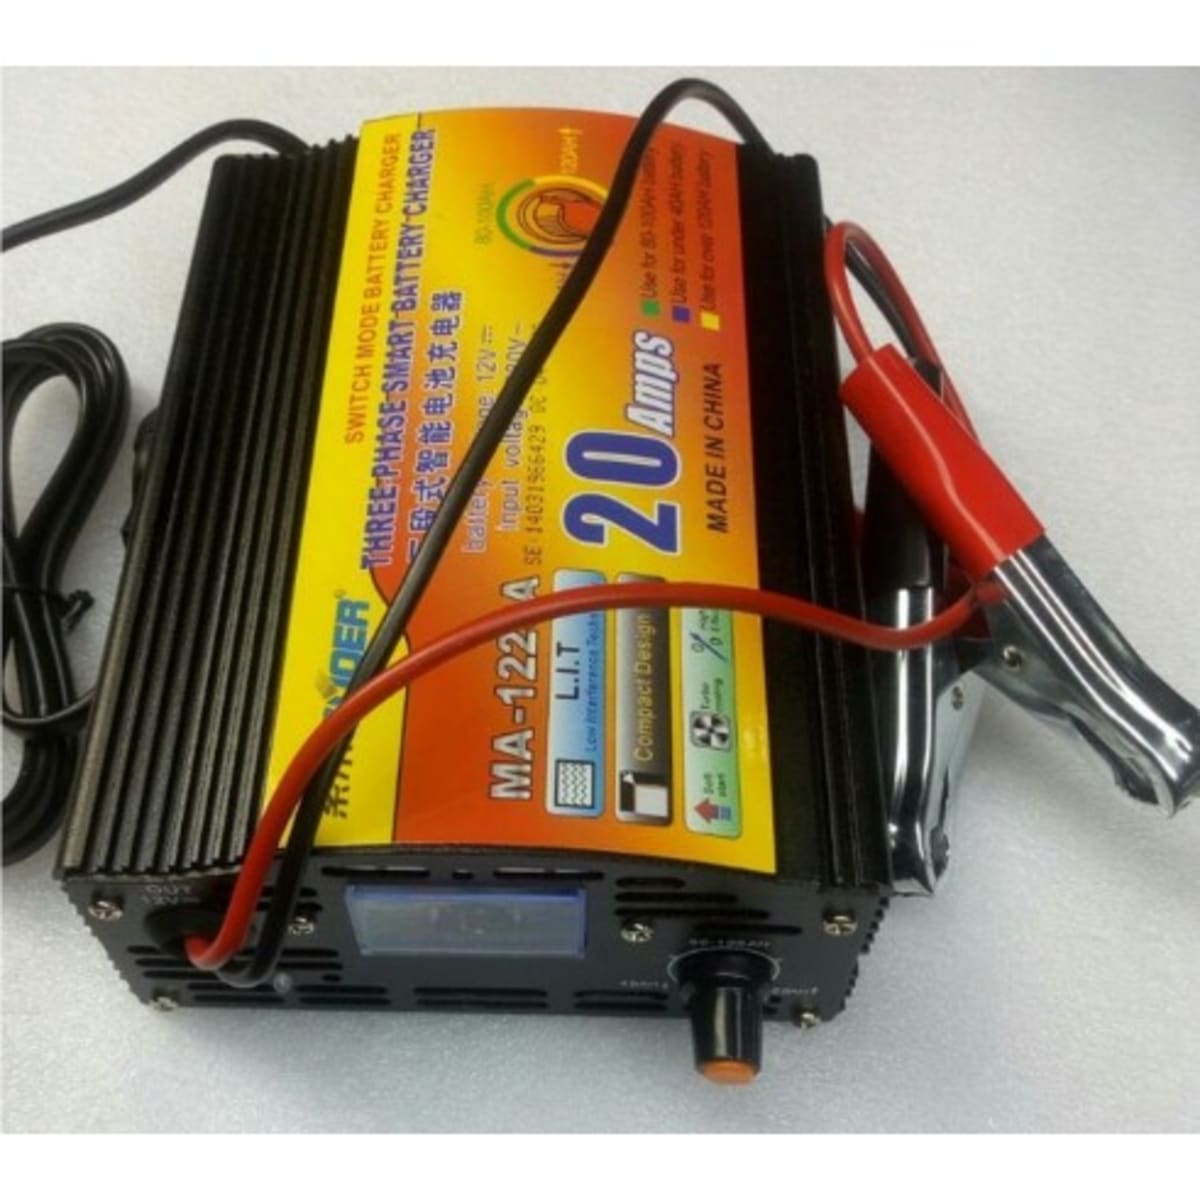 Suoer 20A 12V Intelligent Battery Charger (MA-1220A)